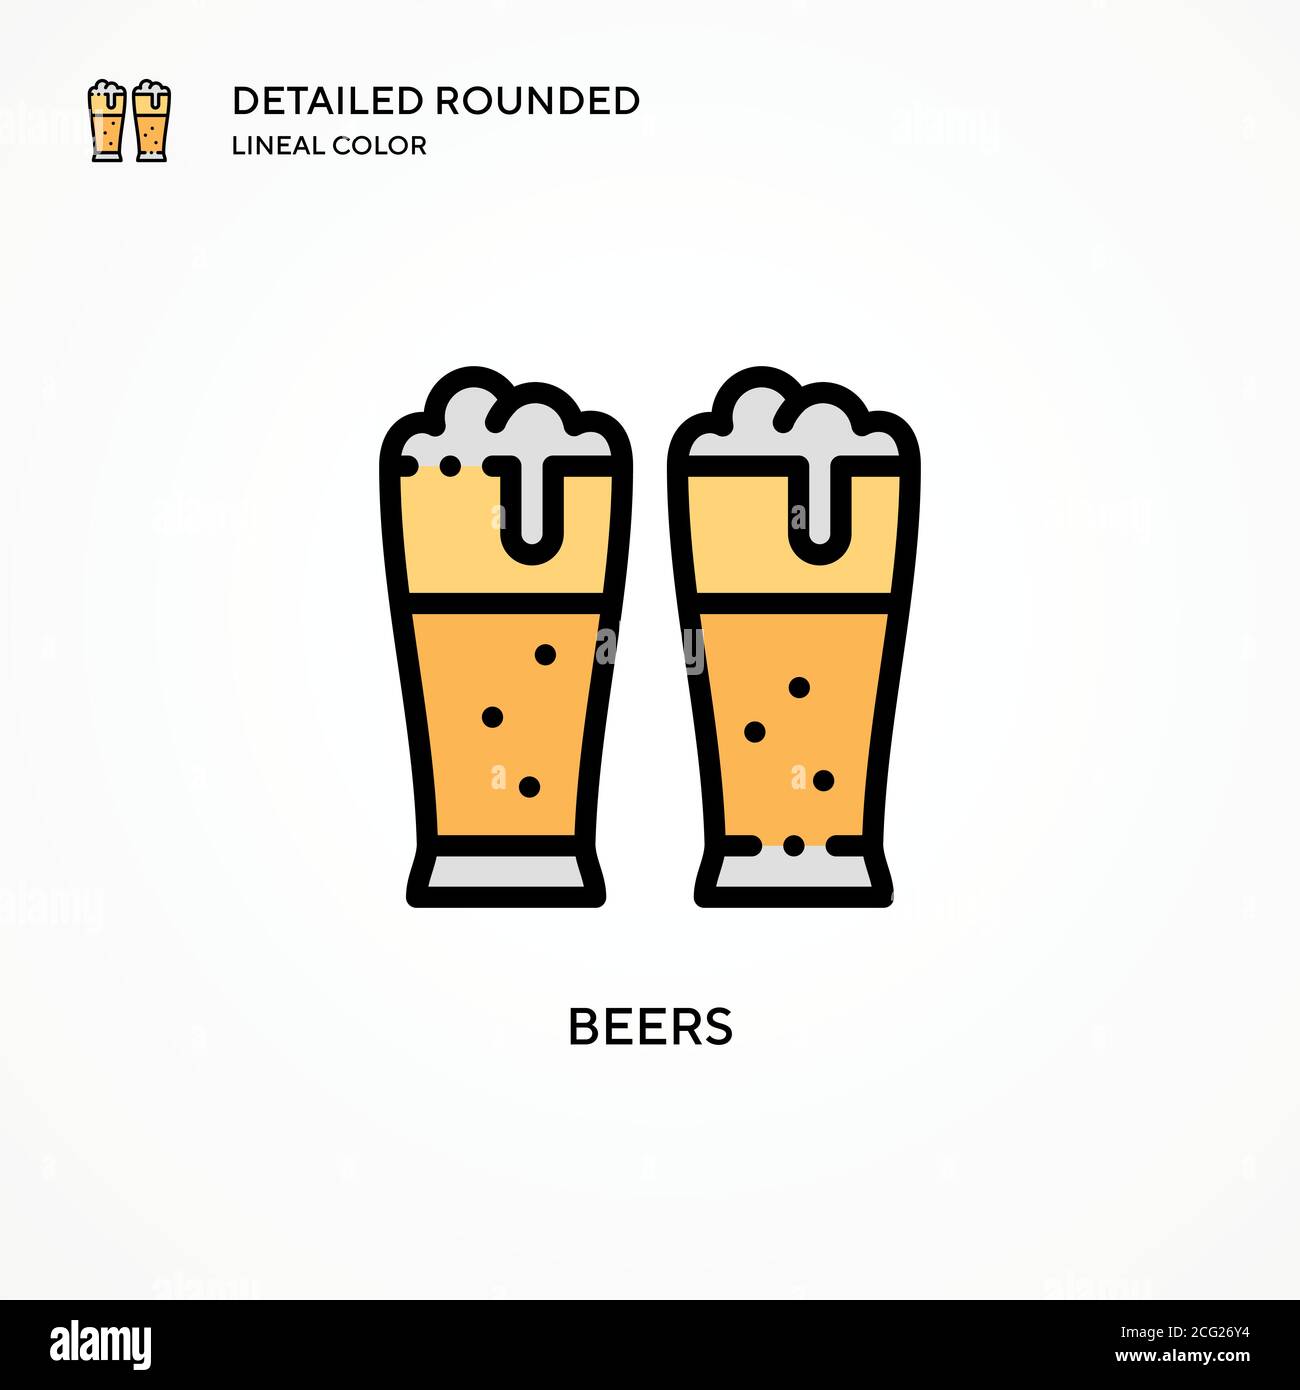 Beers vector icon. Modern vector illustration concepts. Easy to edit and customize. Stock Vector